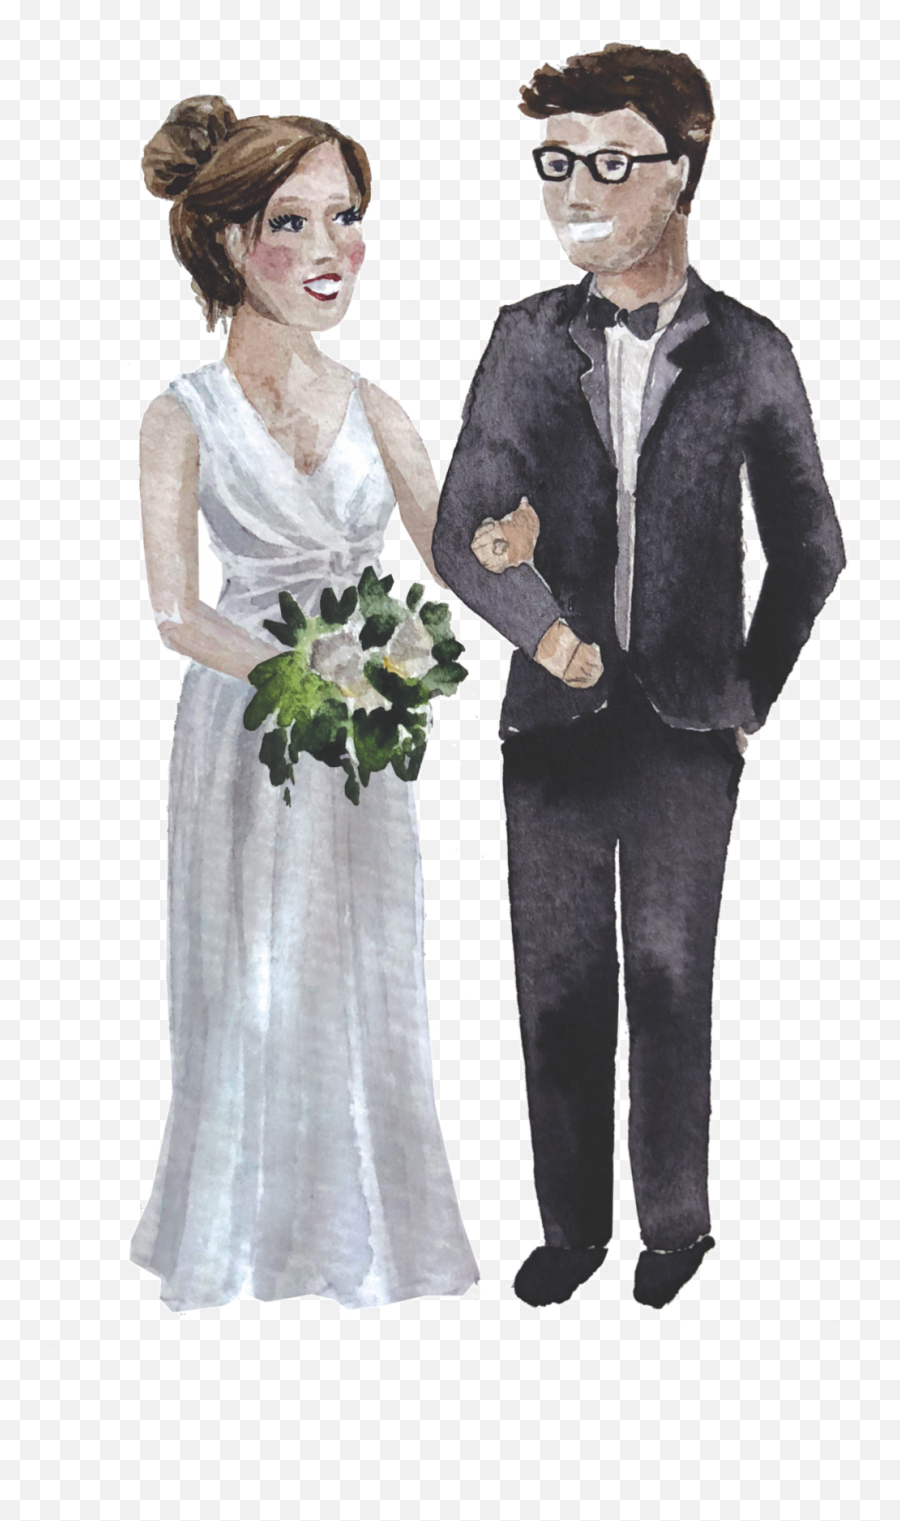 Groom Png - Bride And Groom Tuxedo 207868 Vippng Tuxedo,Groom Png